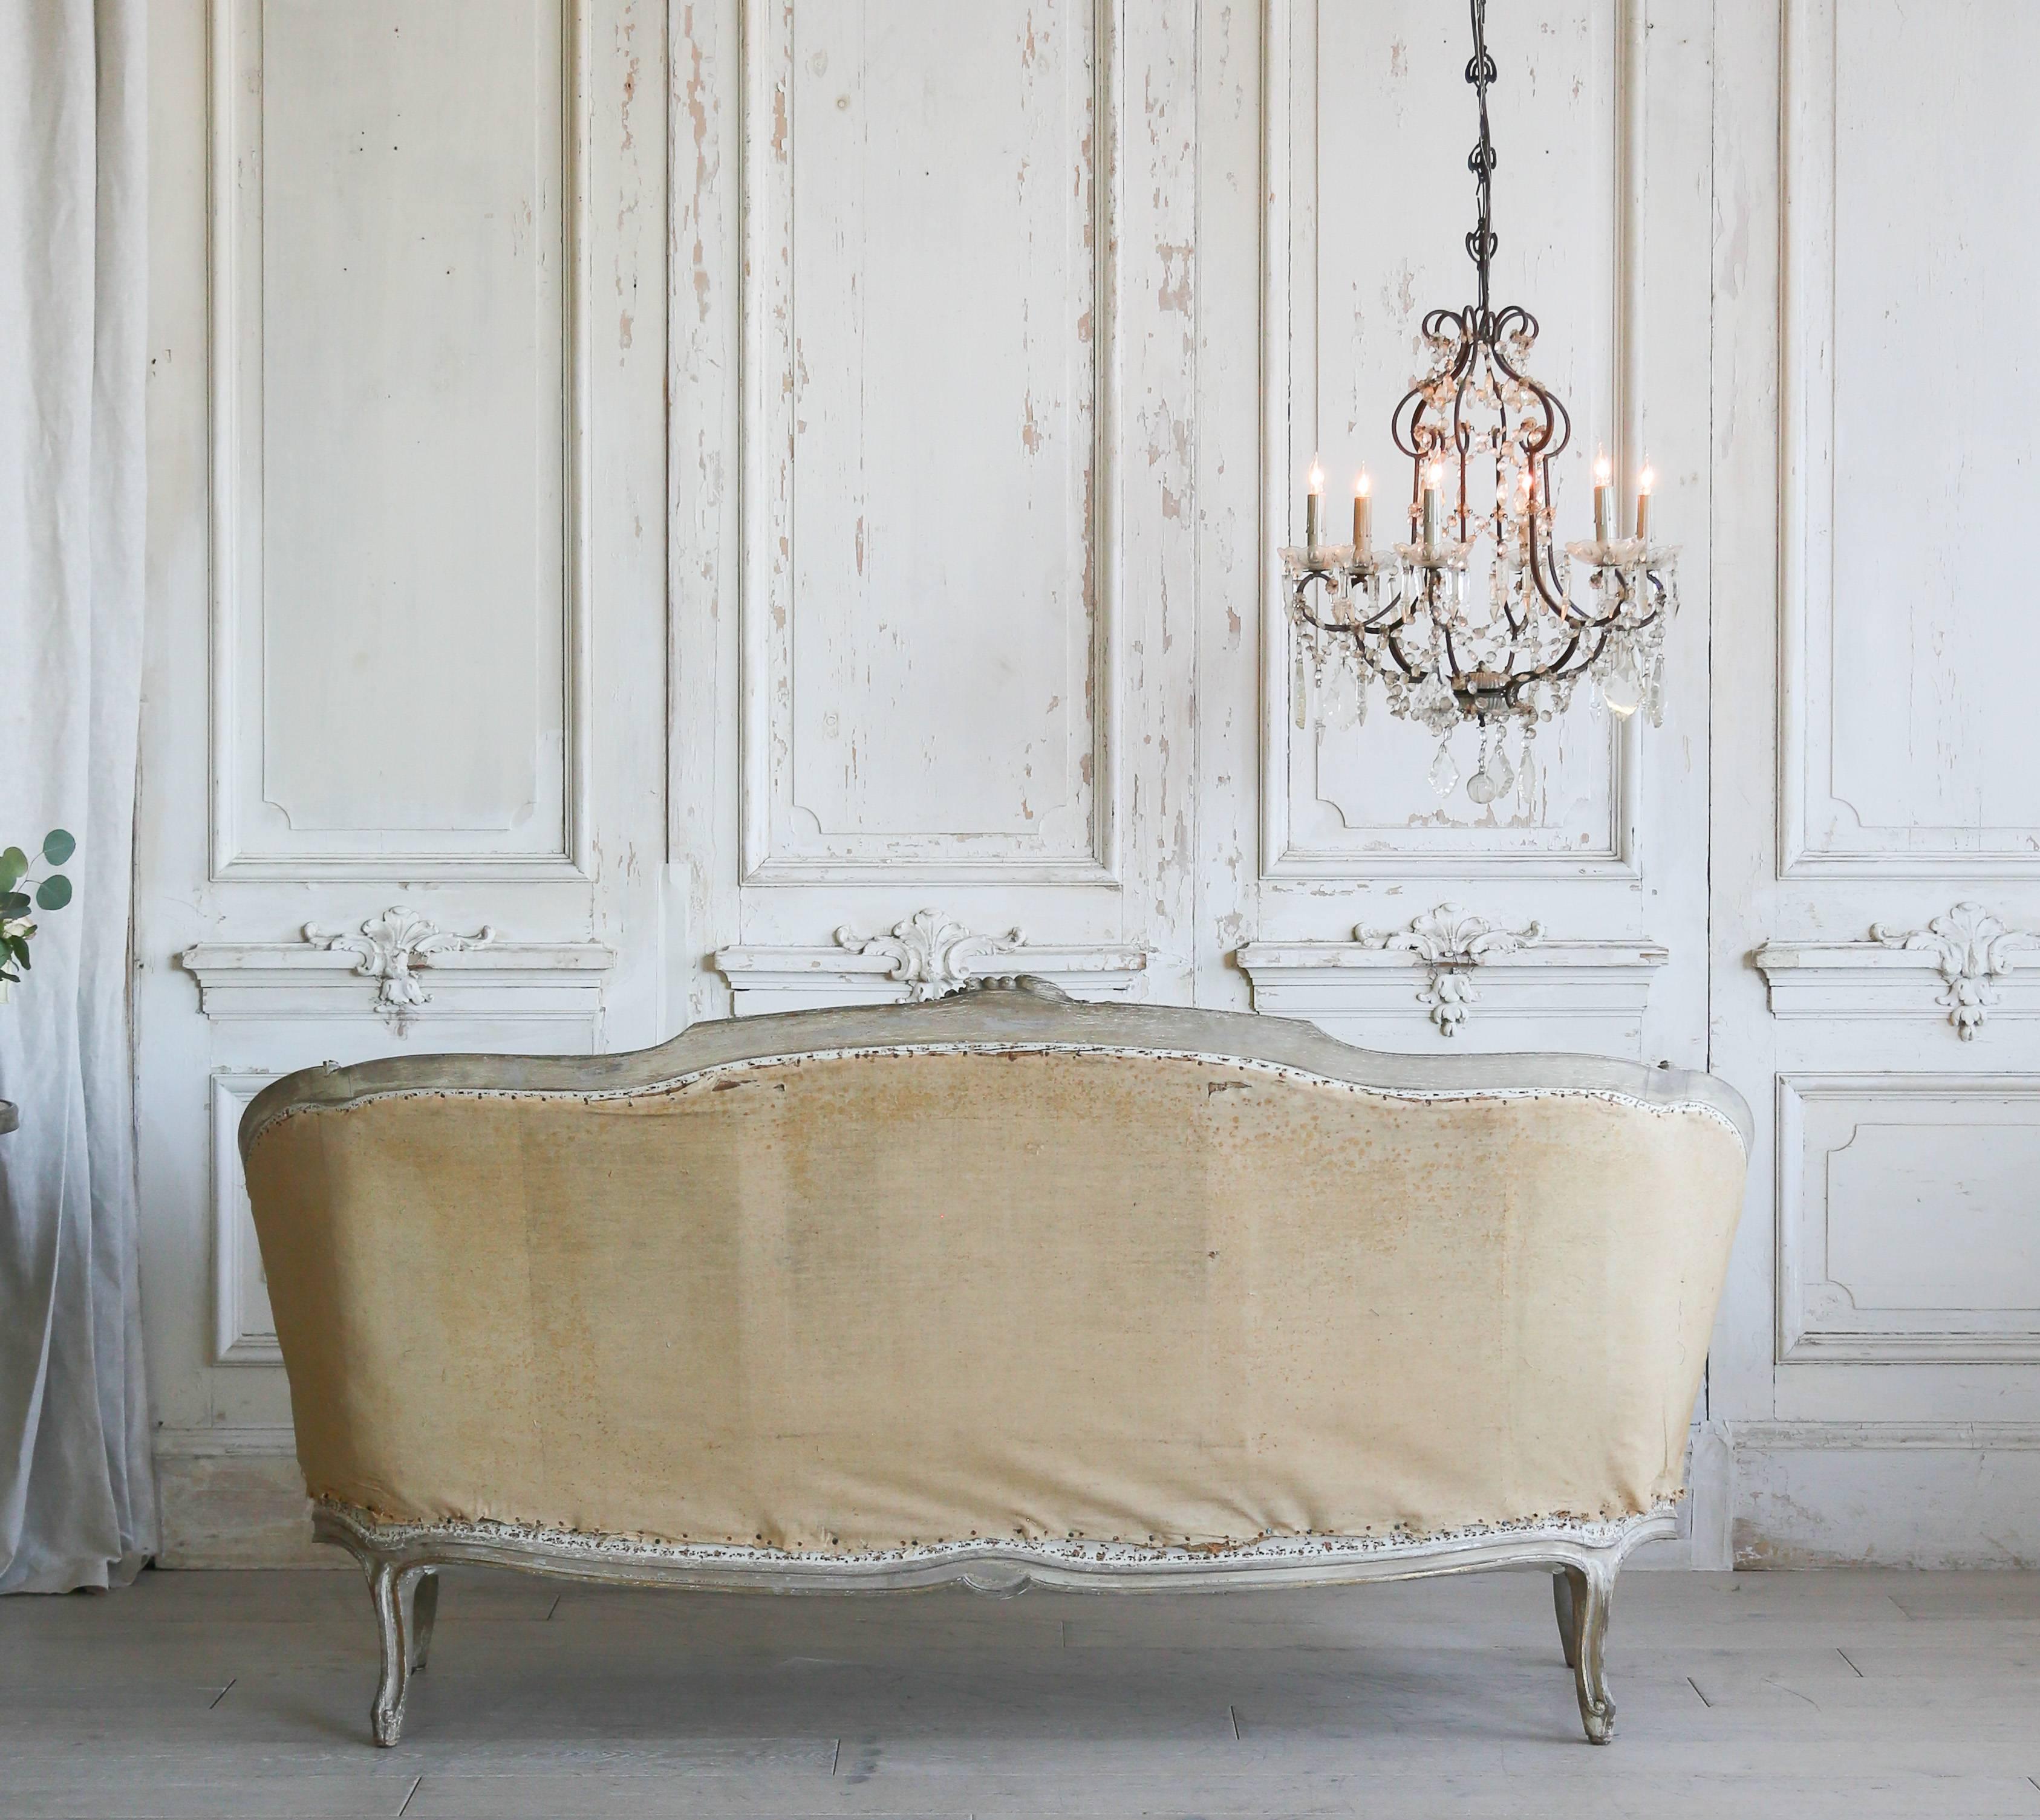 Delightful Louis XV daybed, circa 1880. The distressed bone finish with a hint of olive boasts carved details on the crest an apron. The intricate and delicate flowers make for a stunning piece. Original horsehair stuffing and fabric covering. A